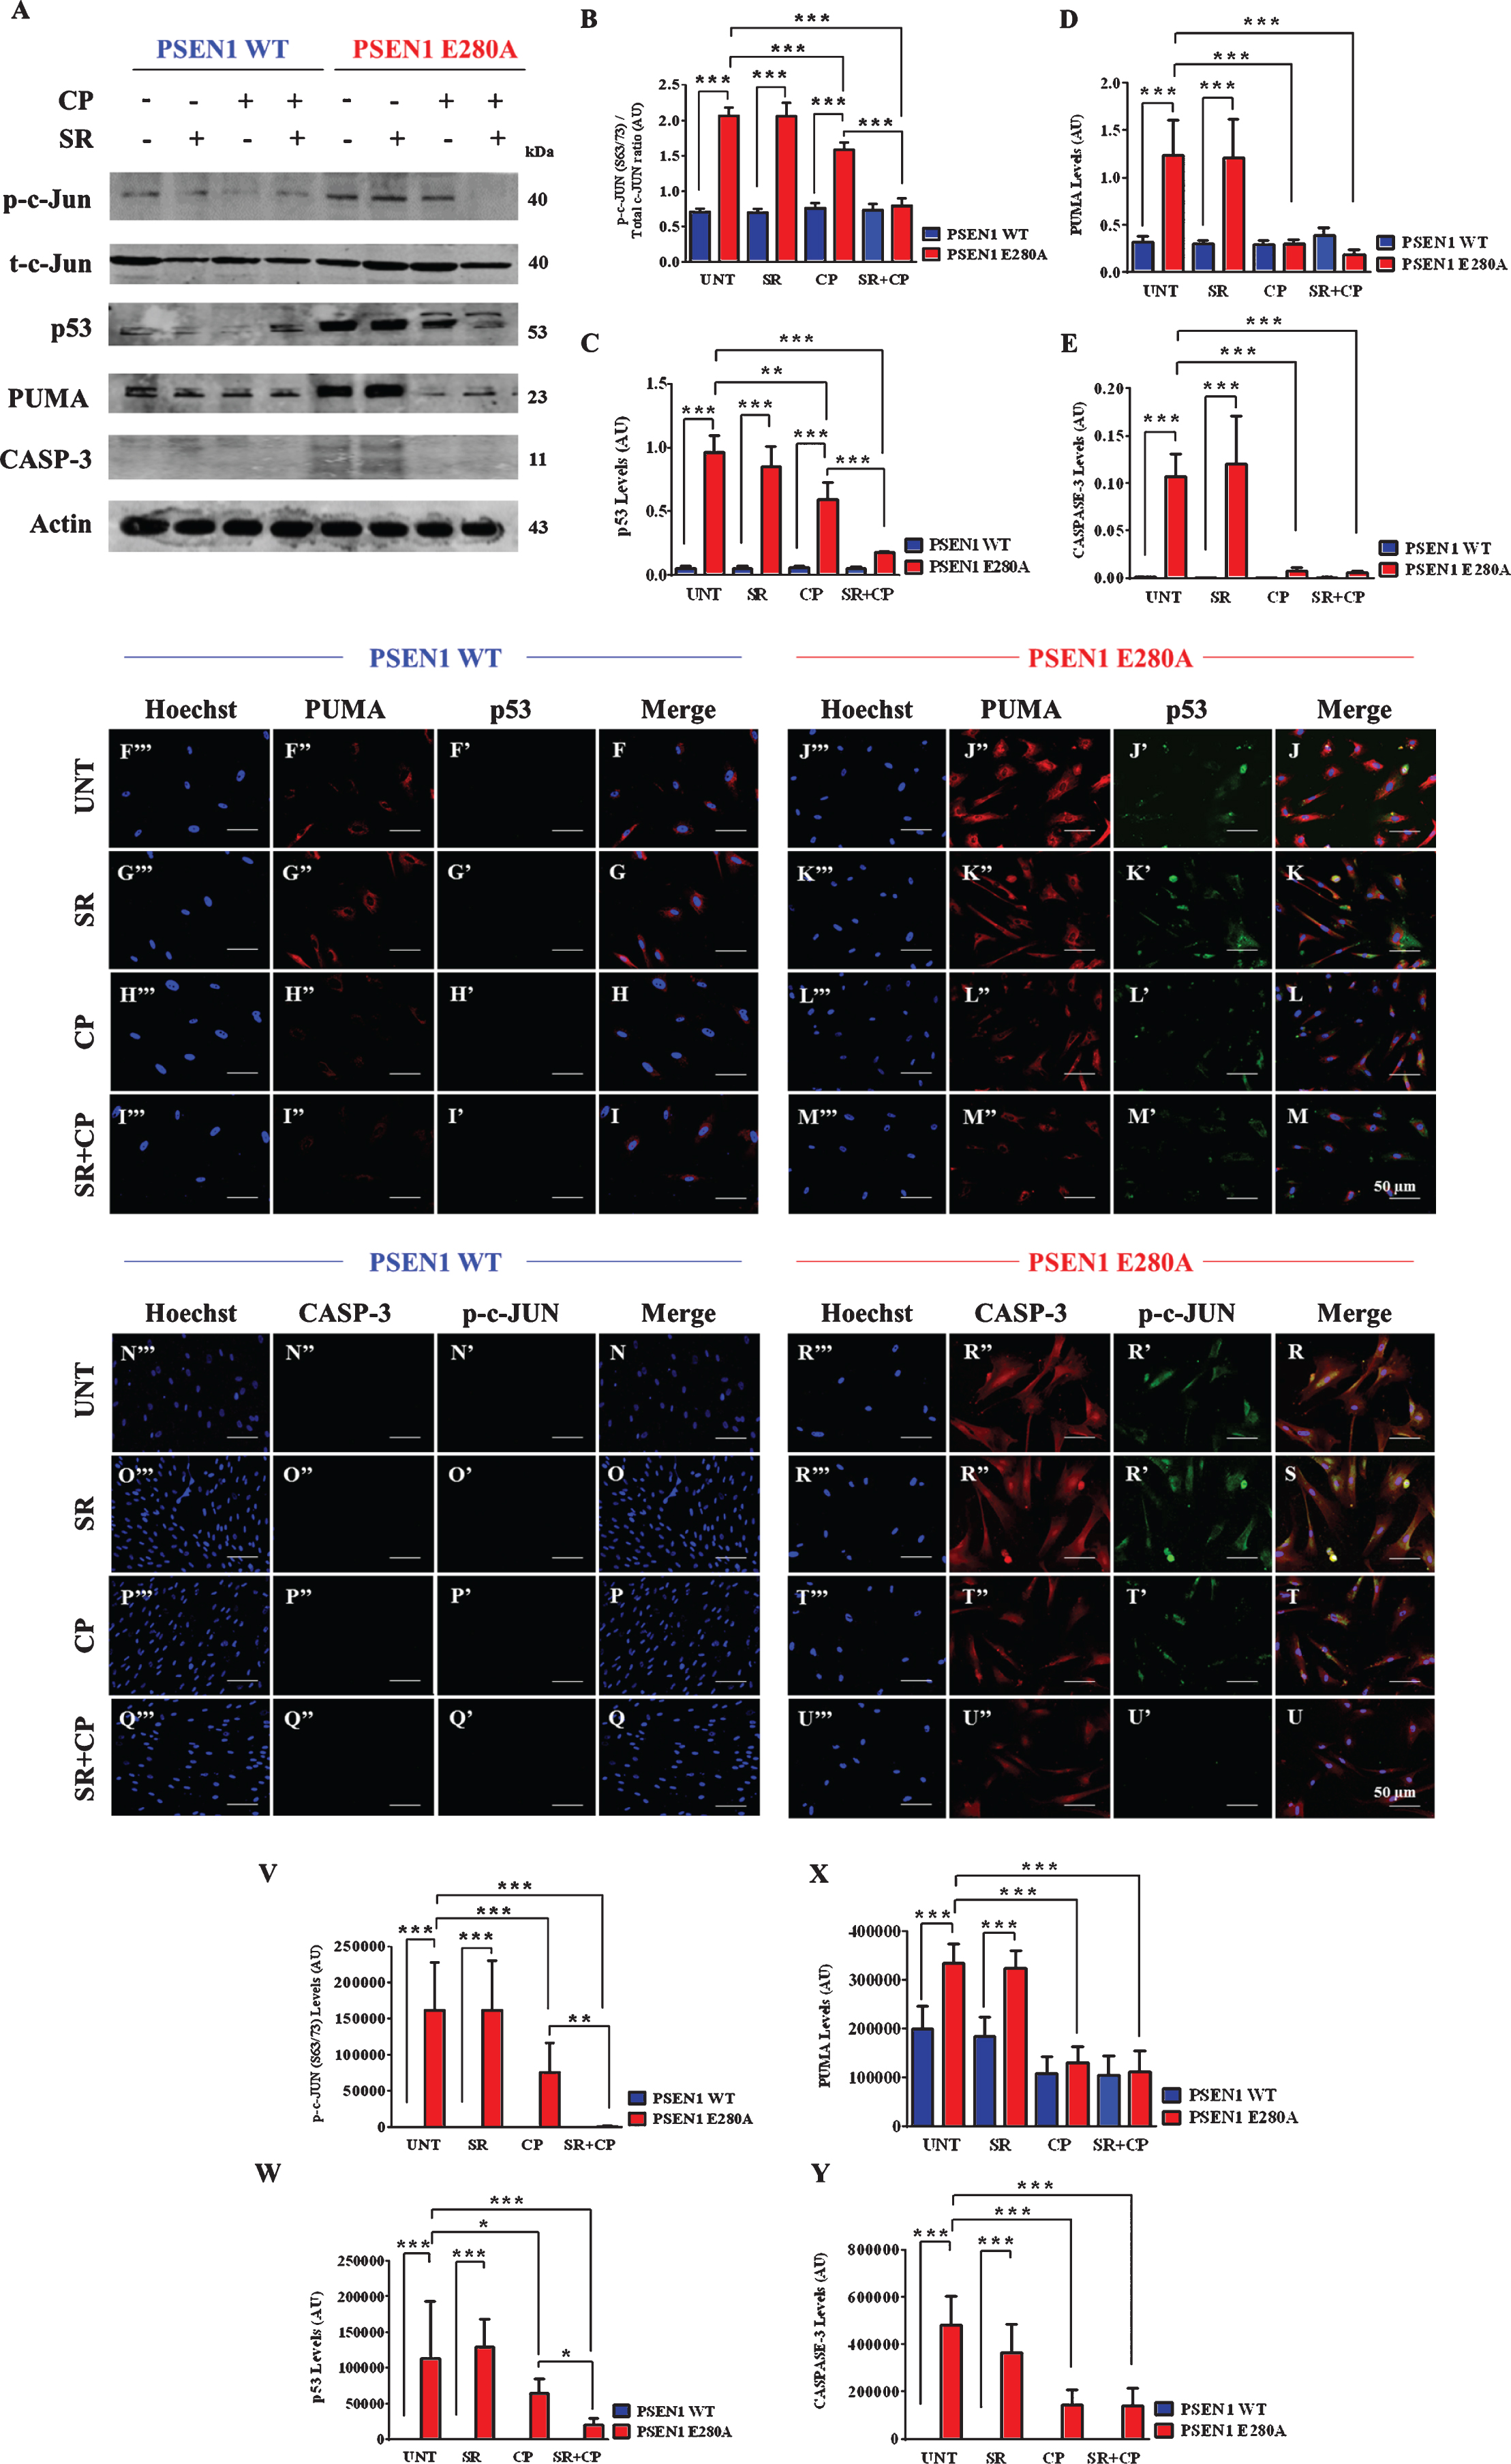 CP55940 reduced the activation of p53, PUMA, c-Jun, and caspase-3 independent of CB1Rs signaling in PSEN1 E280A ChLNs. After 7 days of transdifferentiation, WT PSEN1 and PSEN1 E280A ChLNs were left Untreated or treated with SR, CP, or SR + CP in regular culture medium for 4 days. After this time, the proteins in the extracts were blotted with primary antibodies against phosphorylated c-Jun (p-c-JUN)/total c-Jun, p53, PUMA, caspase-3 (CASP-3) and actin proteins. The intensities of the western blot bands shown in (A) were measured (B-E) by an infrared imaging system (Odyssey, LI-COR), and the intensity was normalized to that of actin. Additionally, cells were double-stained as indicated in the figure (F-U) with primary antibodies against p53 (green; F’-M’), PUMA (red; F”-M”), c-JUN (green; N’-U’), and CASP-3 (red; N”-U”). The nuclei were stained with Hoechst 33342 (blue; F”’-U”’). V-X) Quantification of c-JUN (V), p53 (W), PUMA (X), and CASP-3 (Y) fluorescence intensity. Data are expressed as the mean±SD; *p < 0.05; **p < 0.01; ***p < 0.001. The blots and figures represent 1 out of 3 independent experiments. Image magnification, 200×.